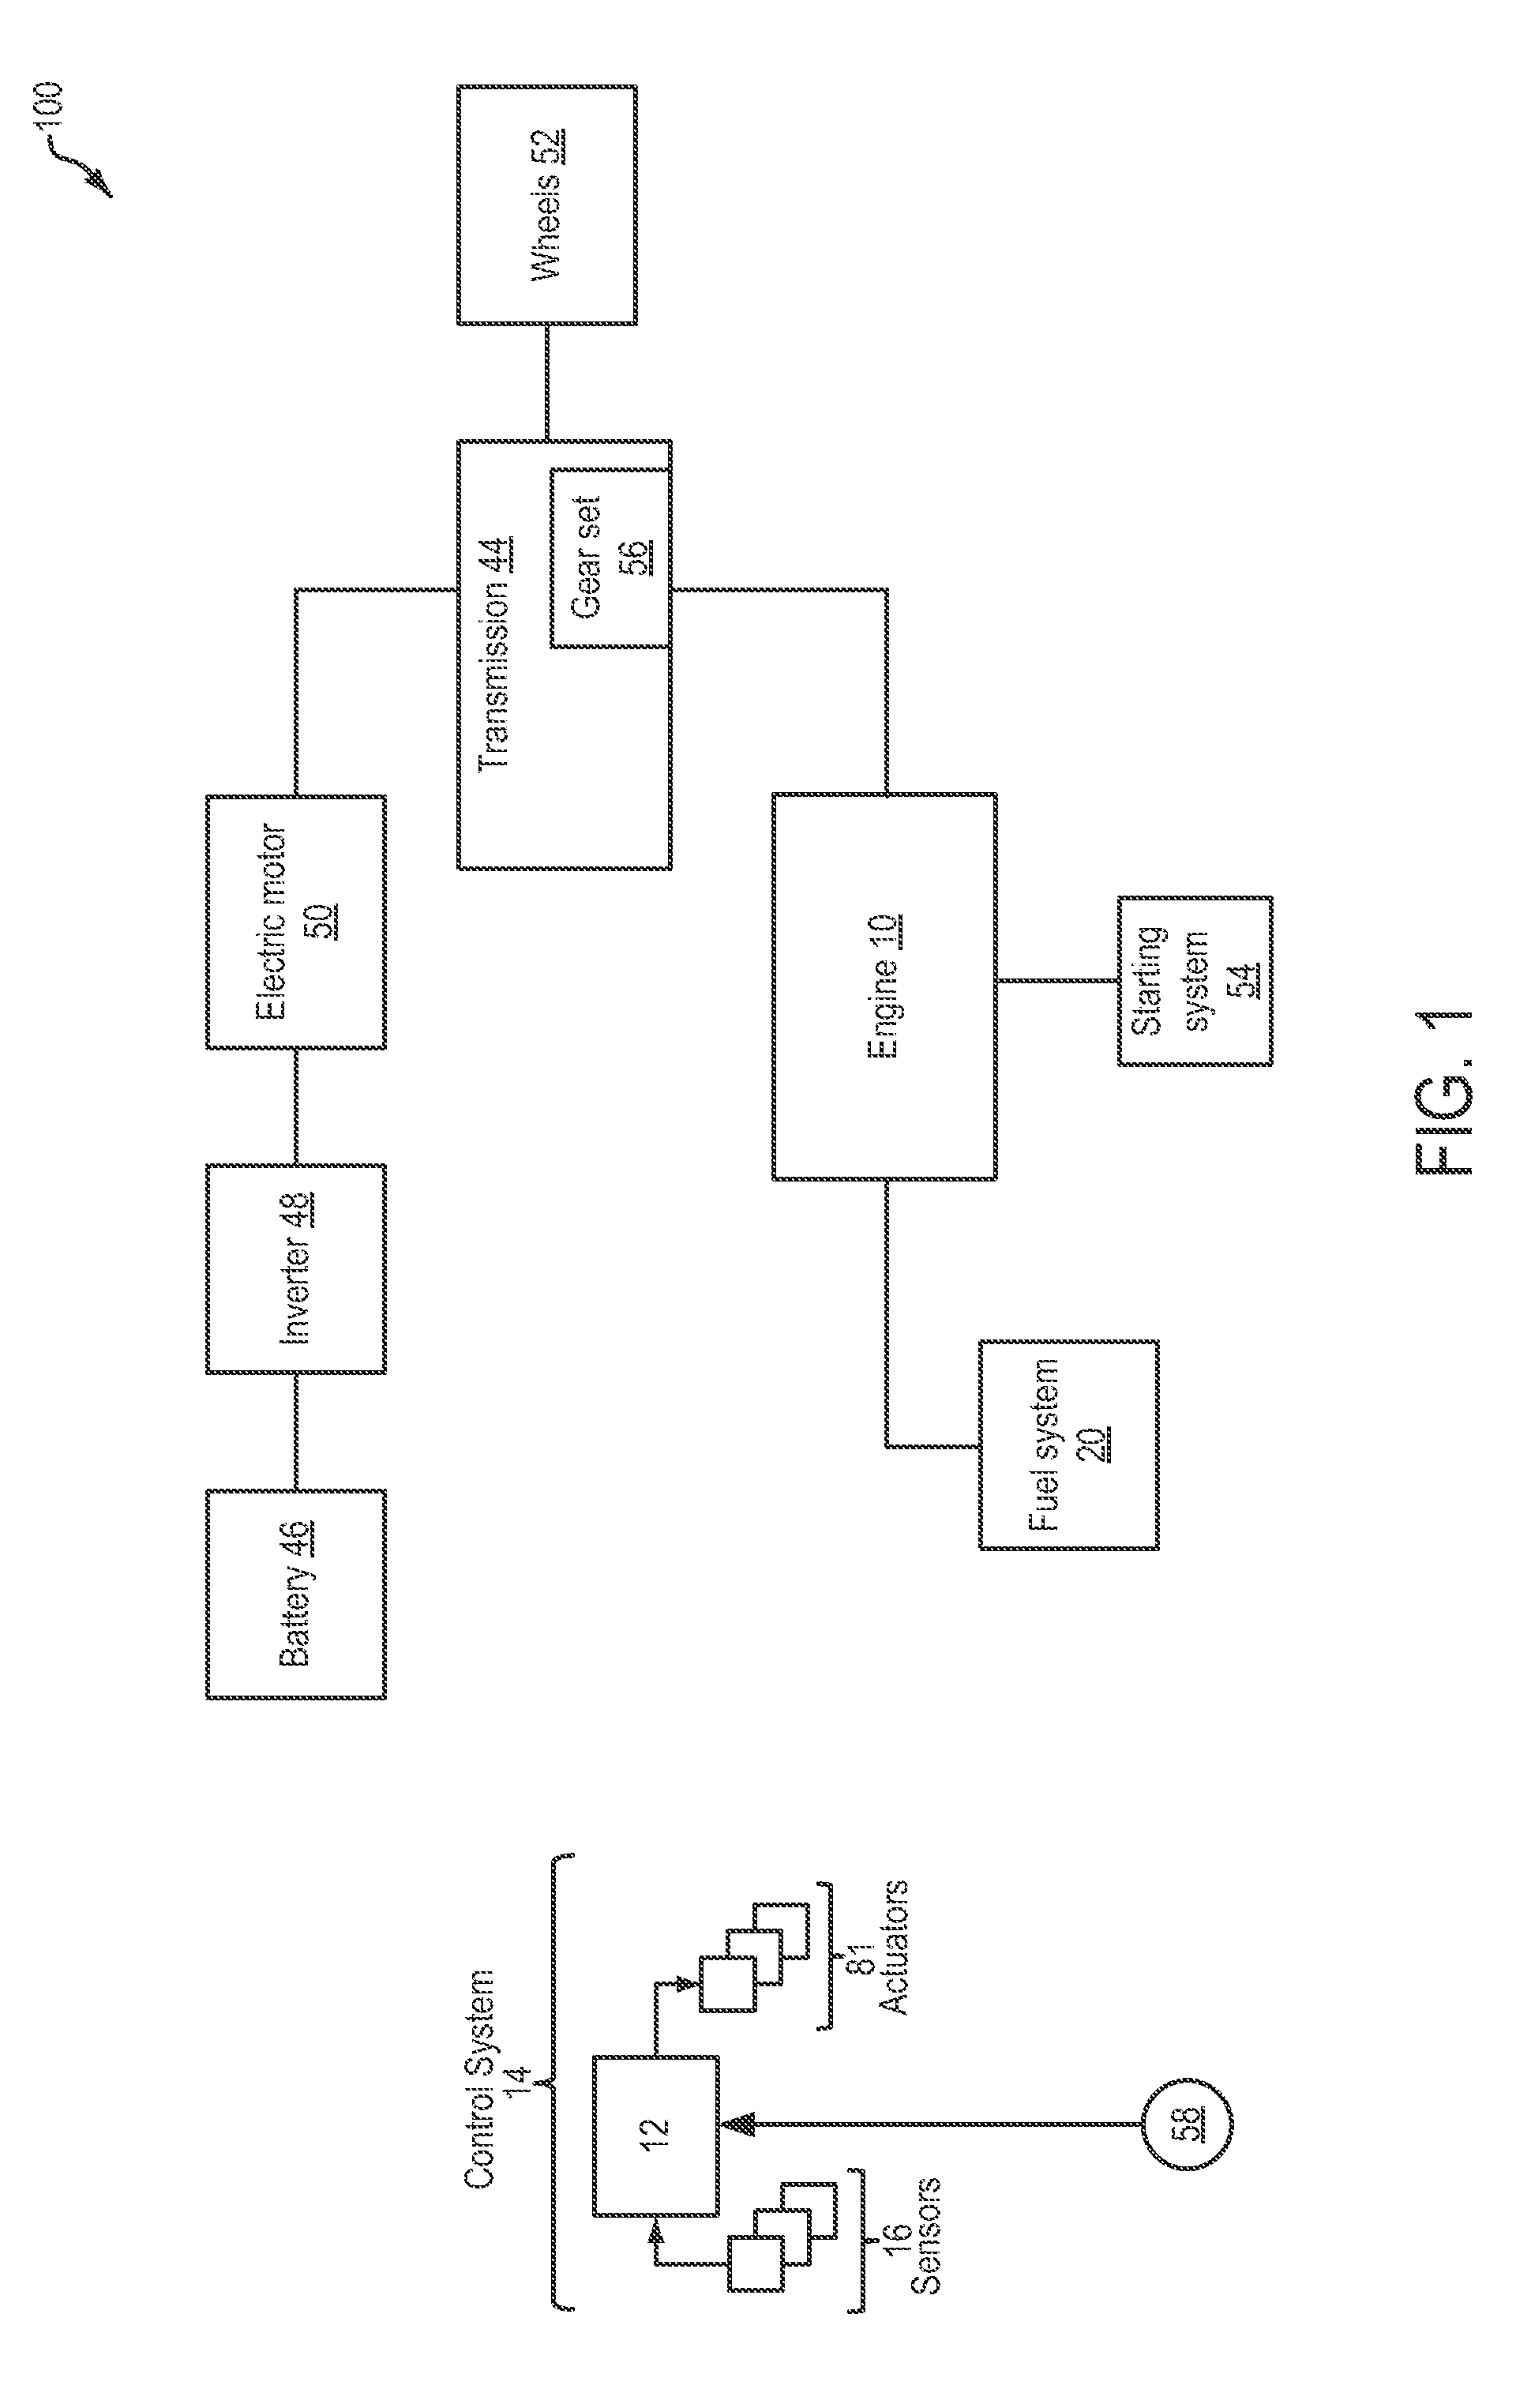 Method and system for vehicle speed control